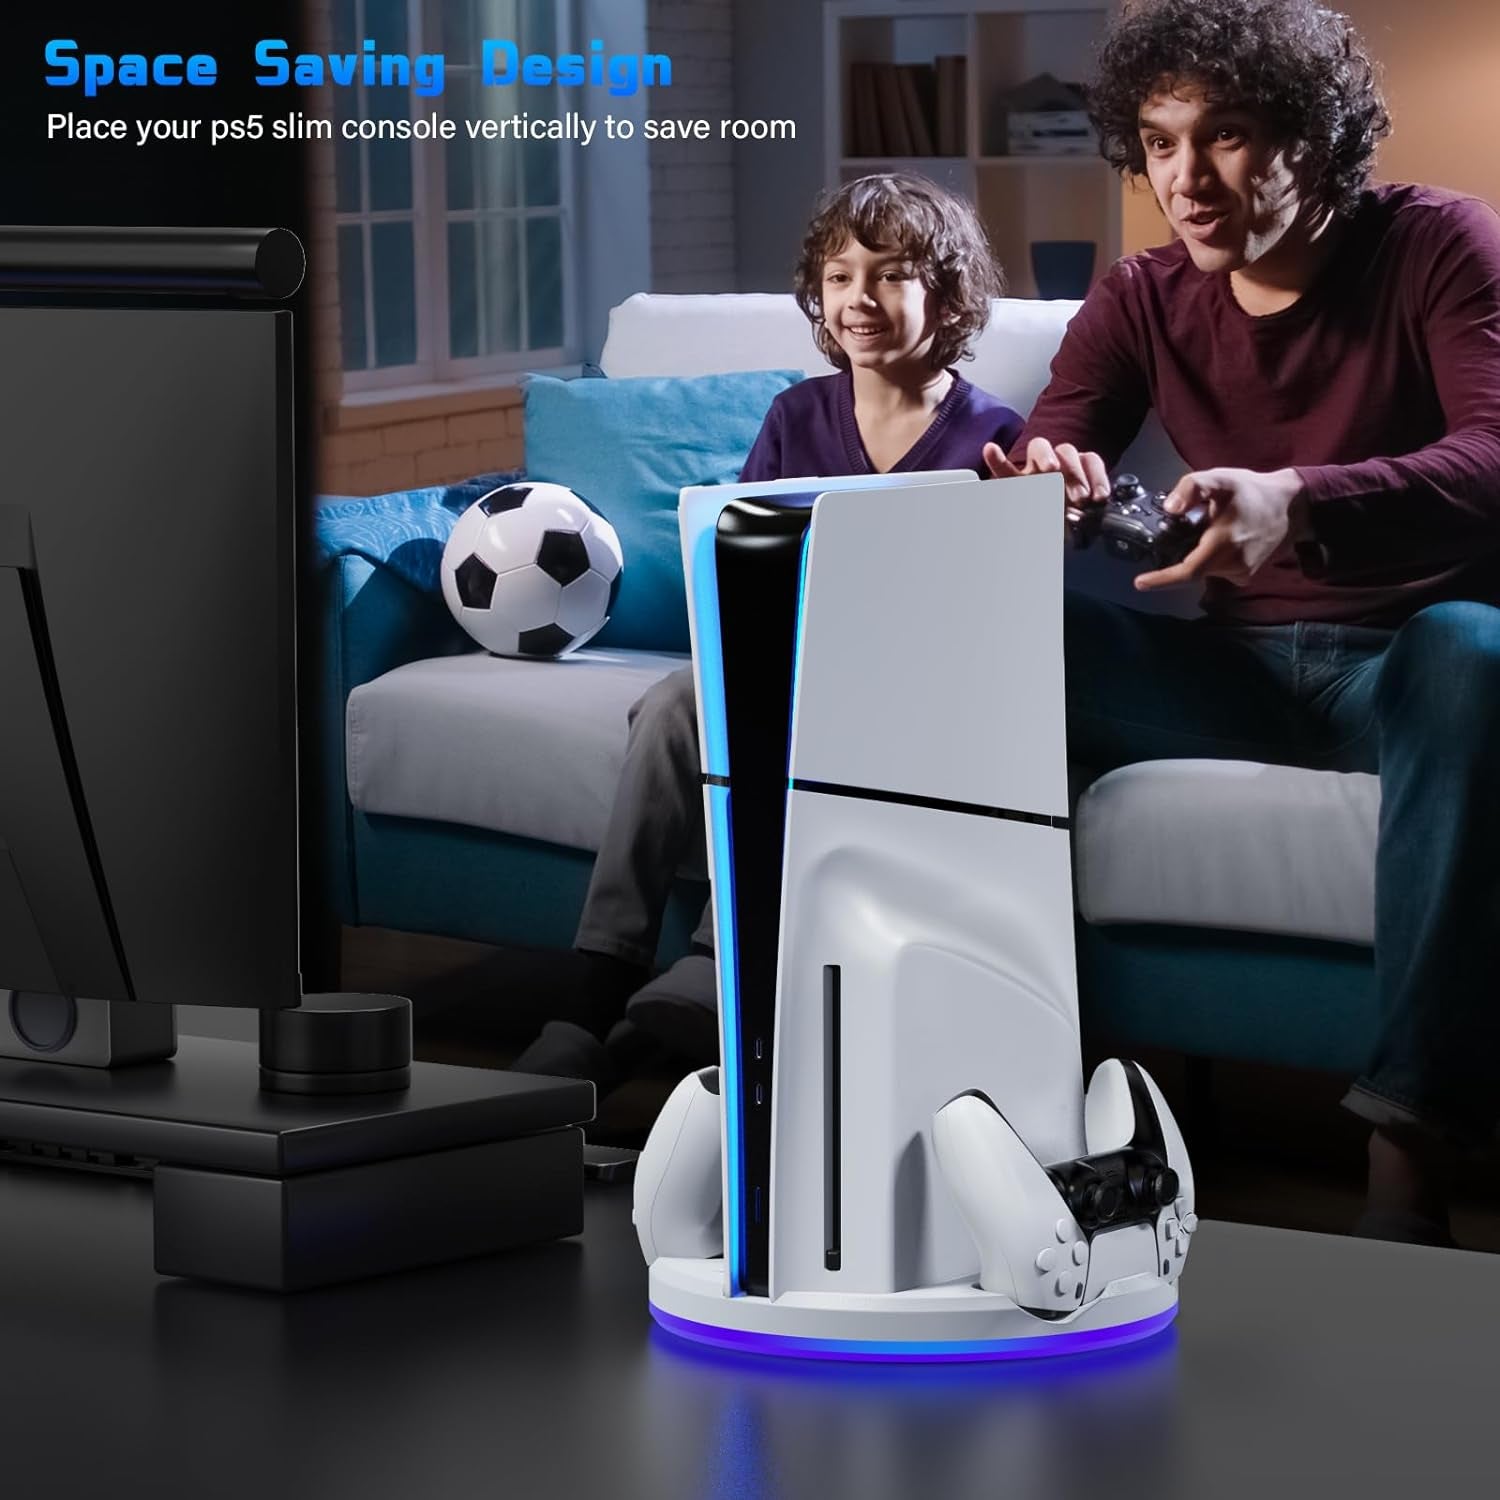 PS5 Slim Stand-And-Dual-Controller-Charging-Station-For-Playstation 5-Slim-Console-Disc&Digital Edition, Cool RGB PS5 Vertical Stand with Controller Charger, PS5 Holder Base Accessory Screw, White